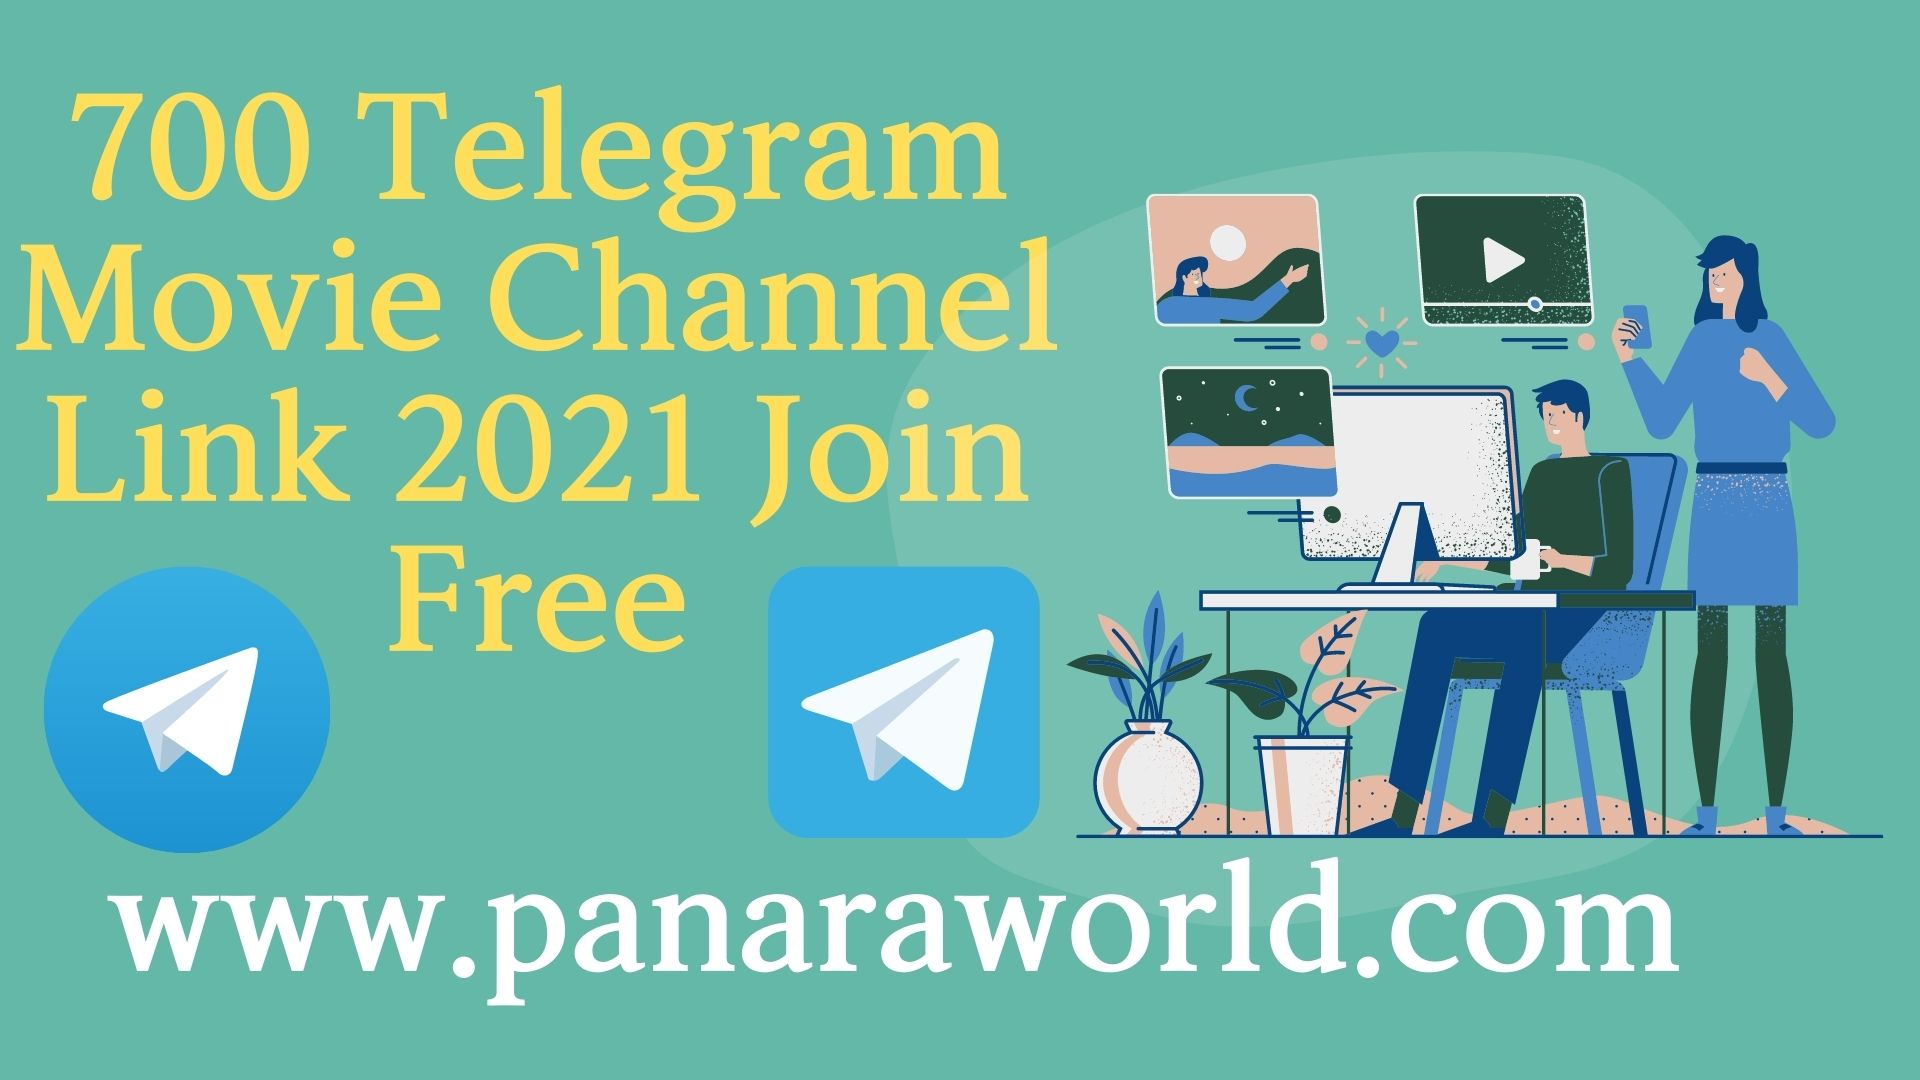 700 Telegram New Movie Channel Link 2023 Join Free - Panaraworld - Daily  Update New Whatsapp Group, pdf form, government scheme